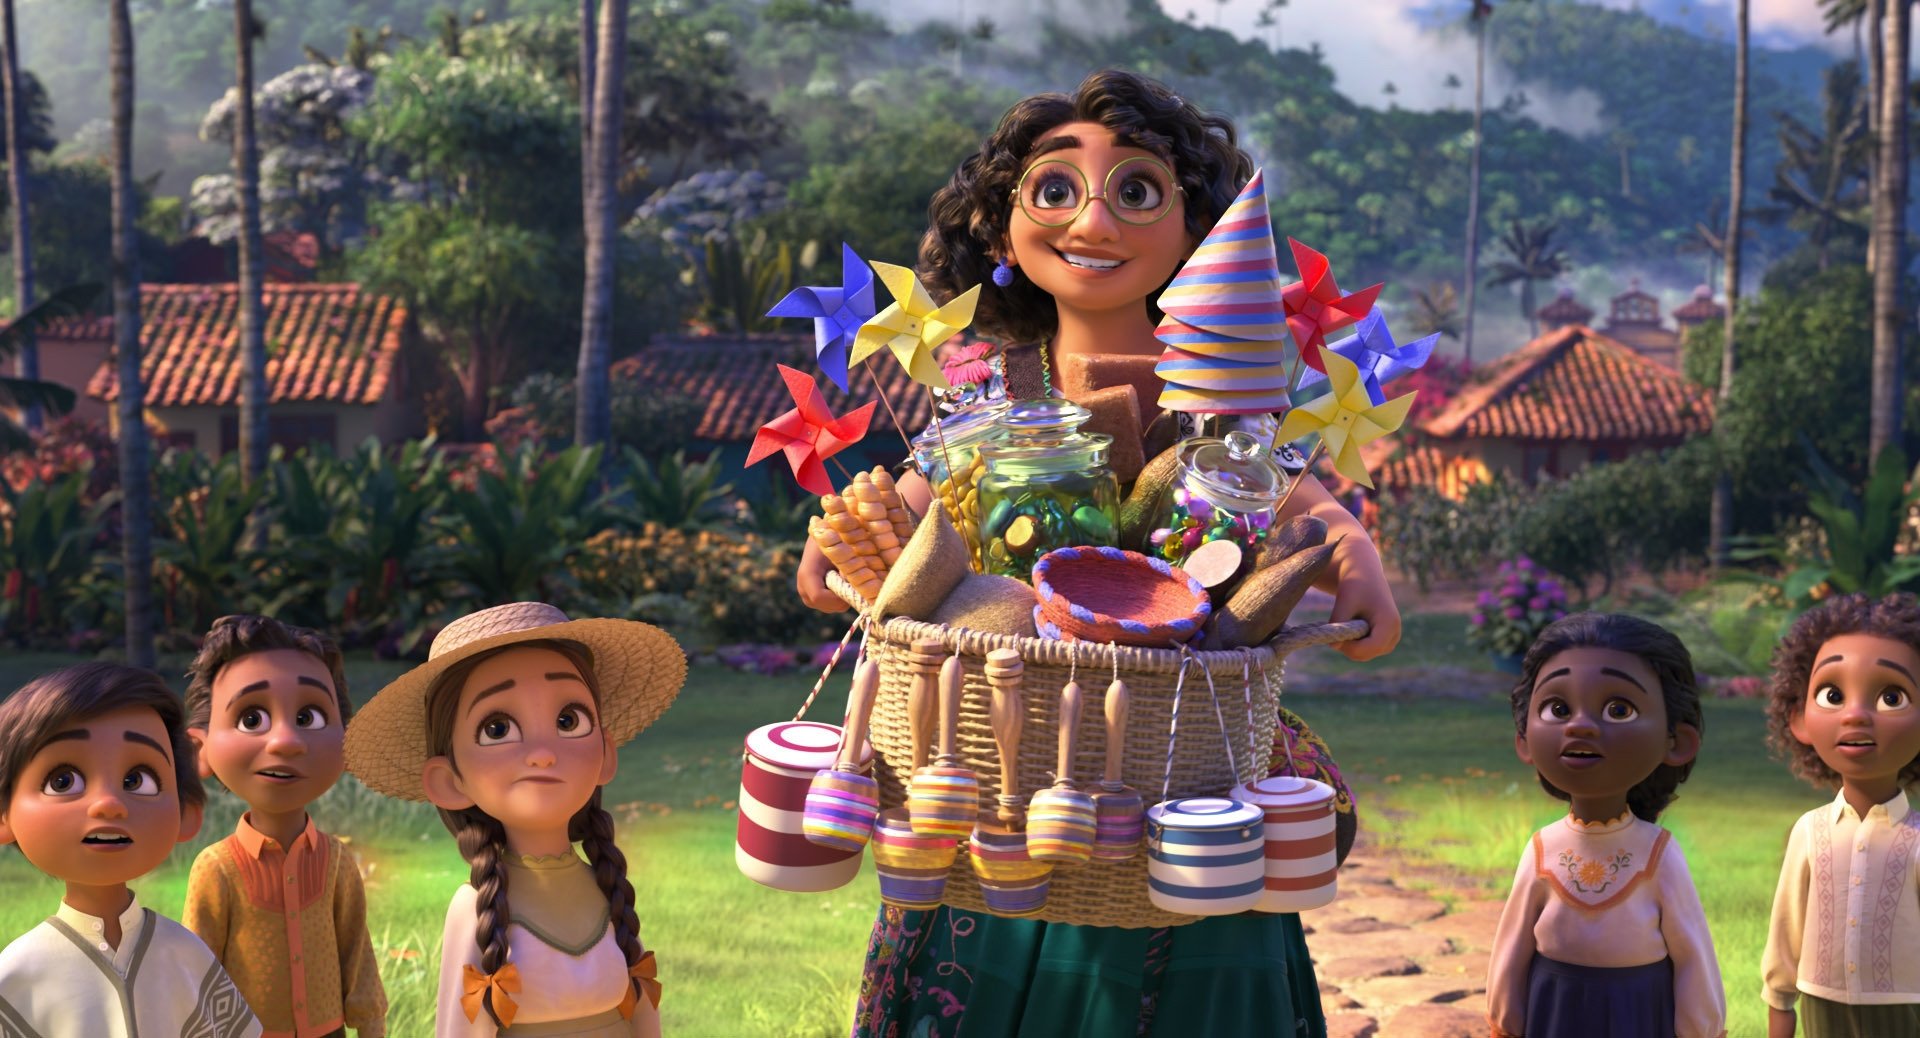 This image released by Disney shows Mirabel, voiced by Stephanie Beatriz, in a scene from the animated film 